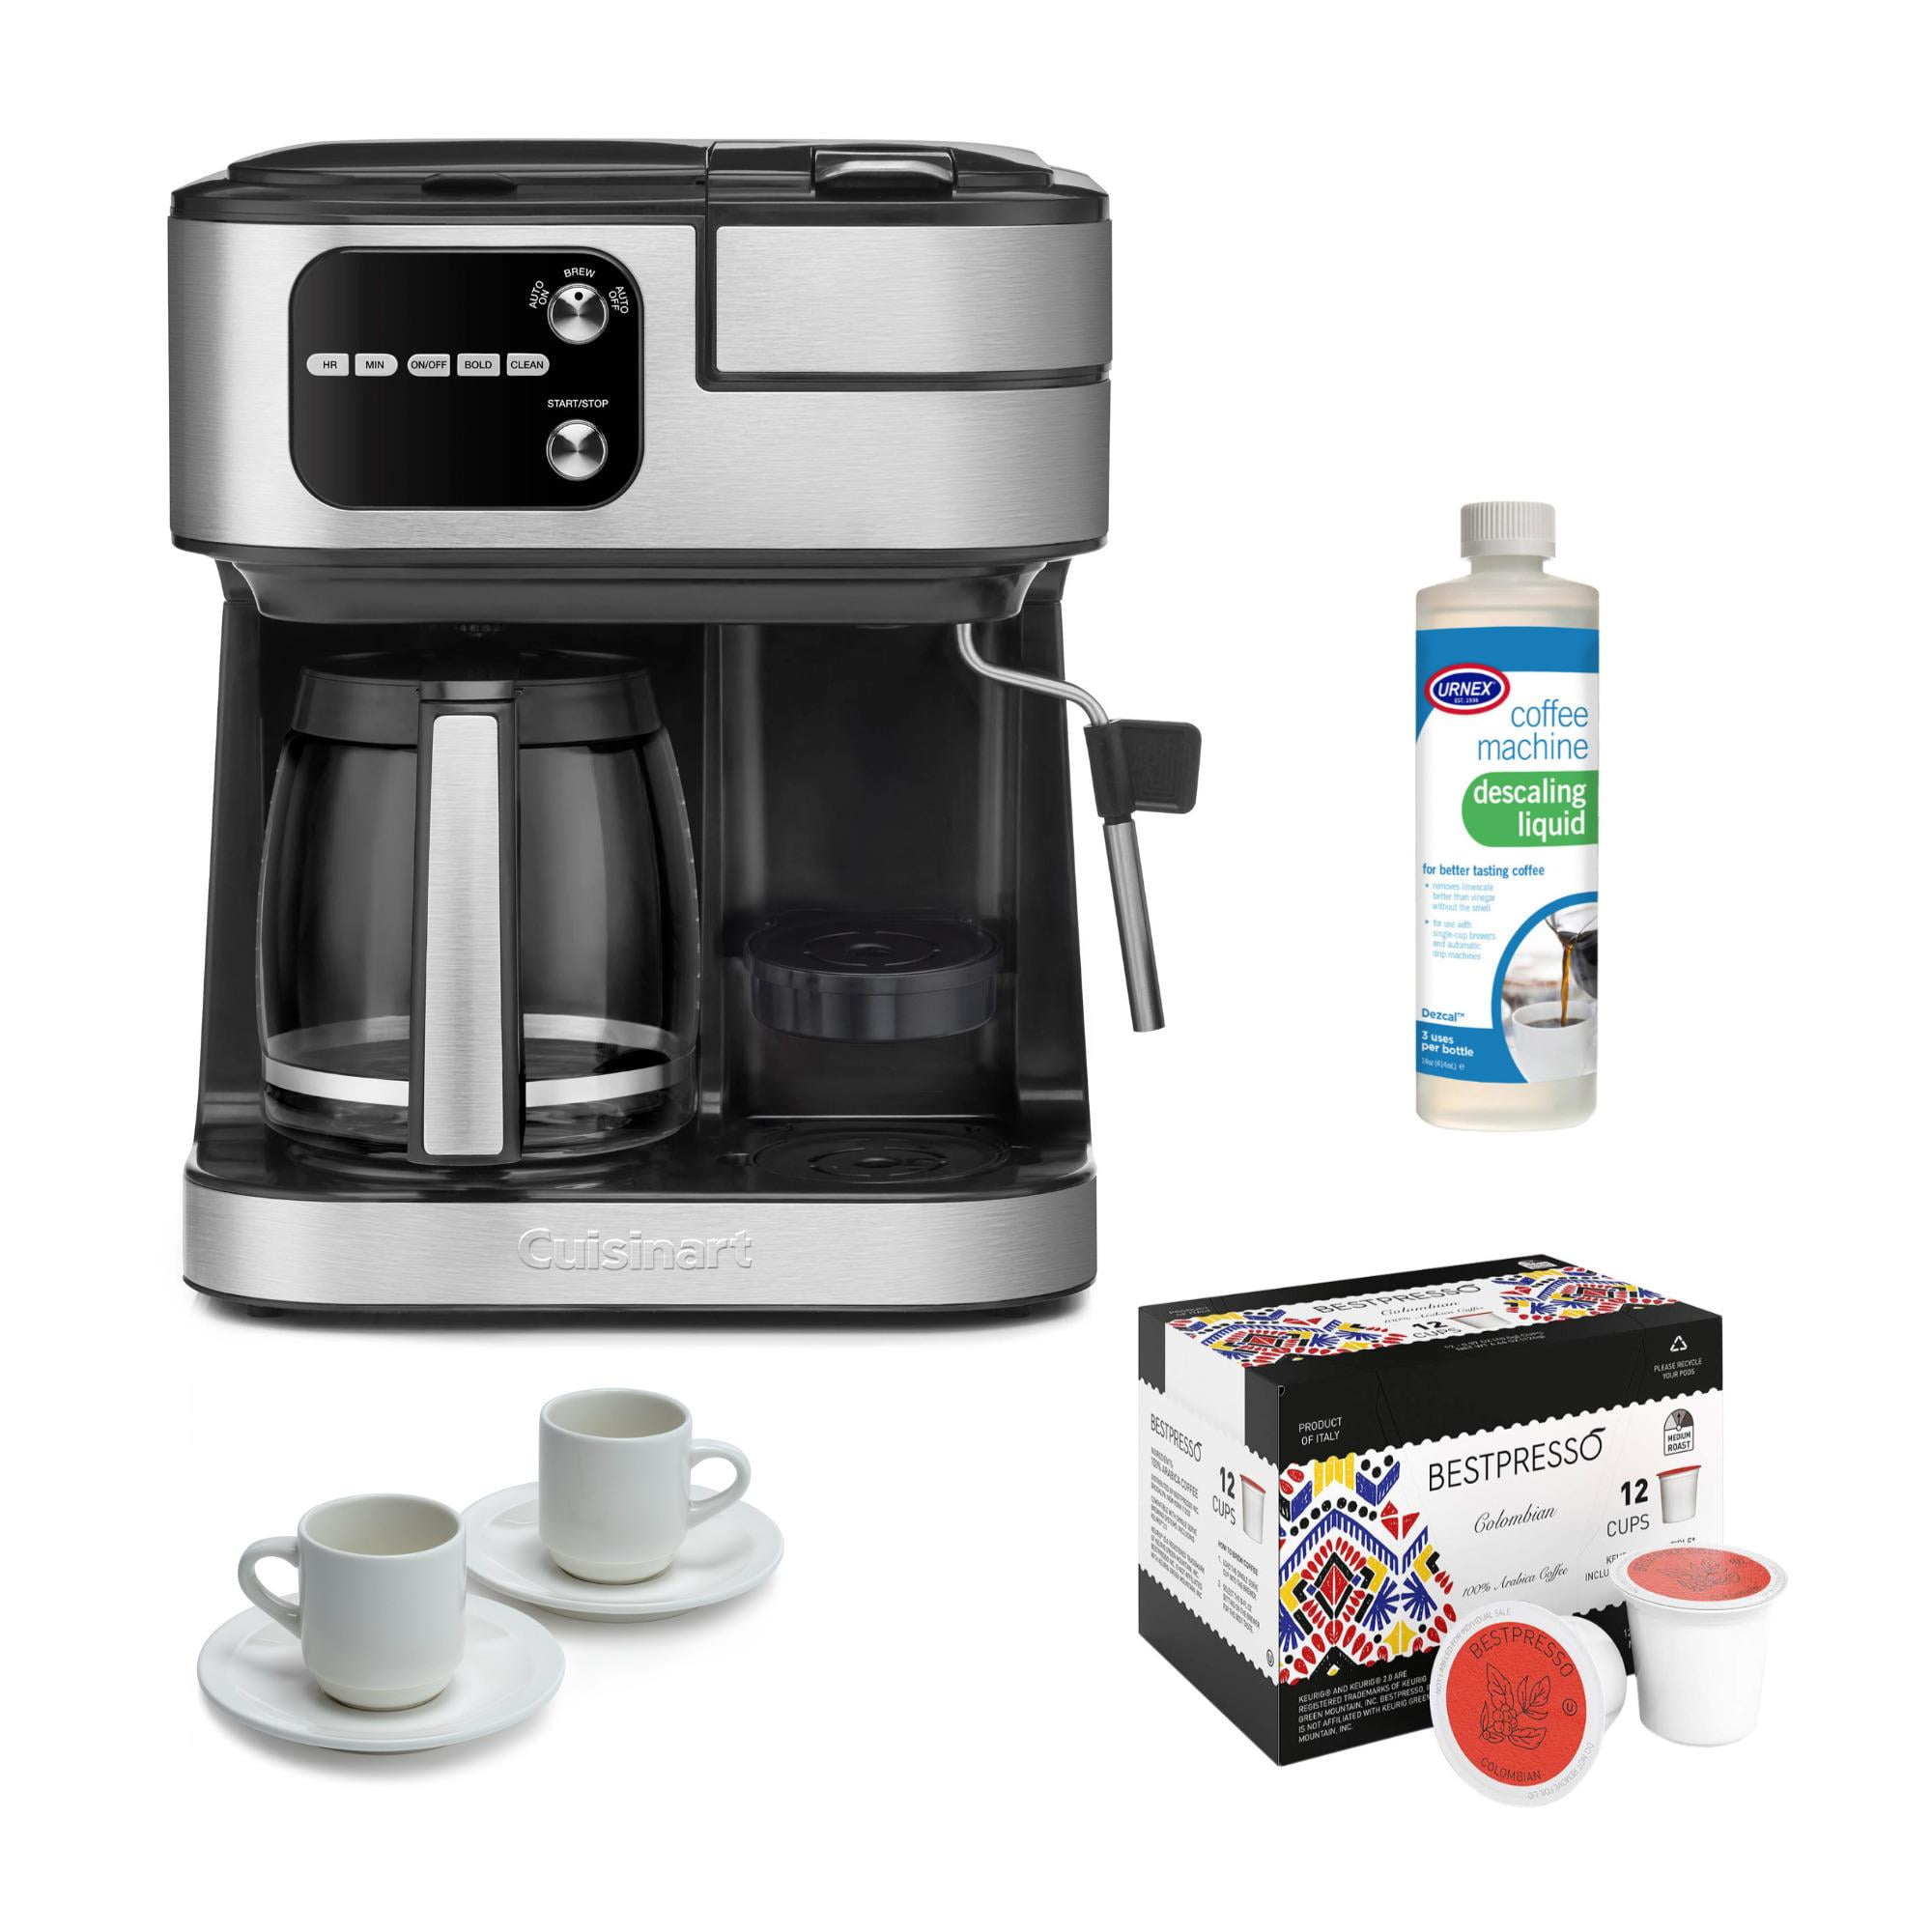 Cuisinart Coffee Maker 2 and 1 unboxing and set up Review #coffeemaker  #cuisinart 